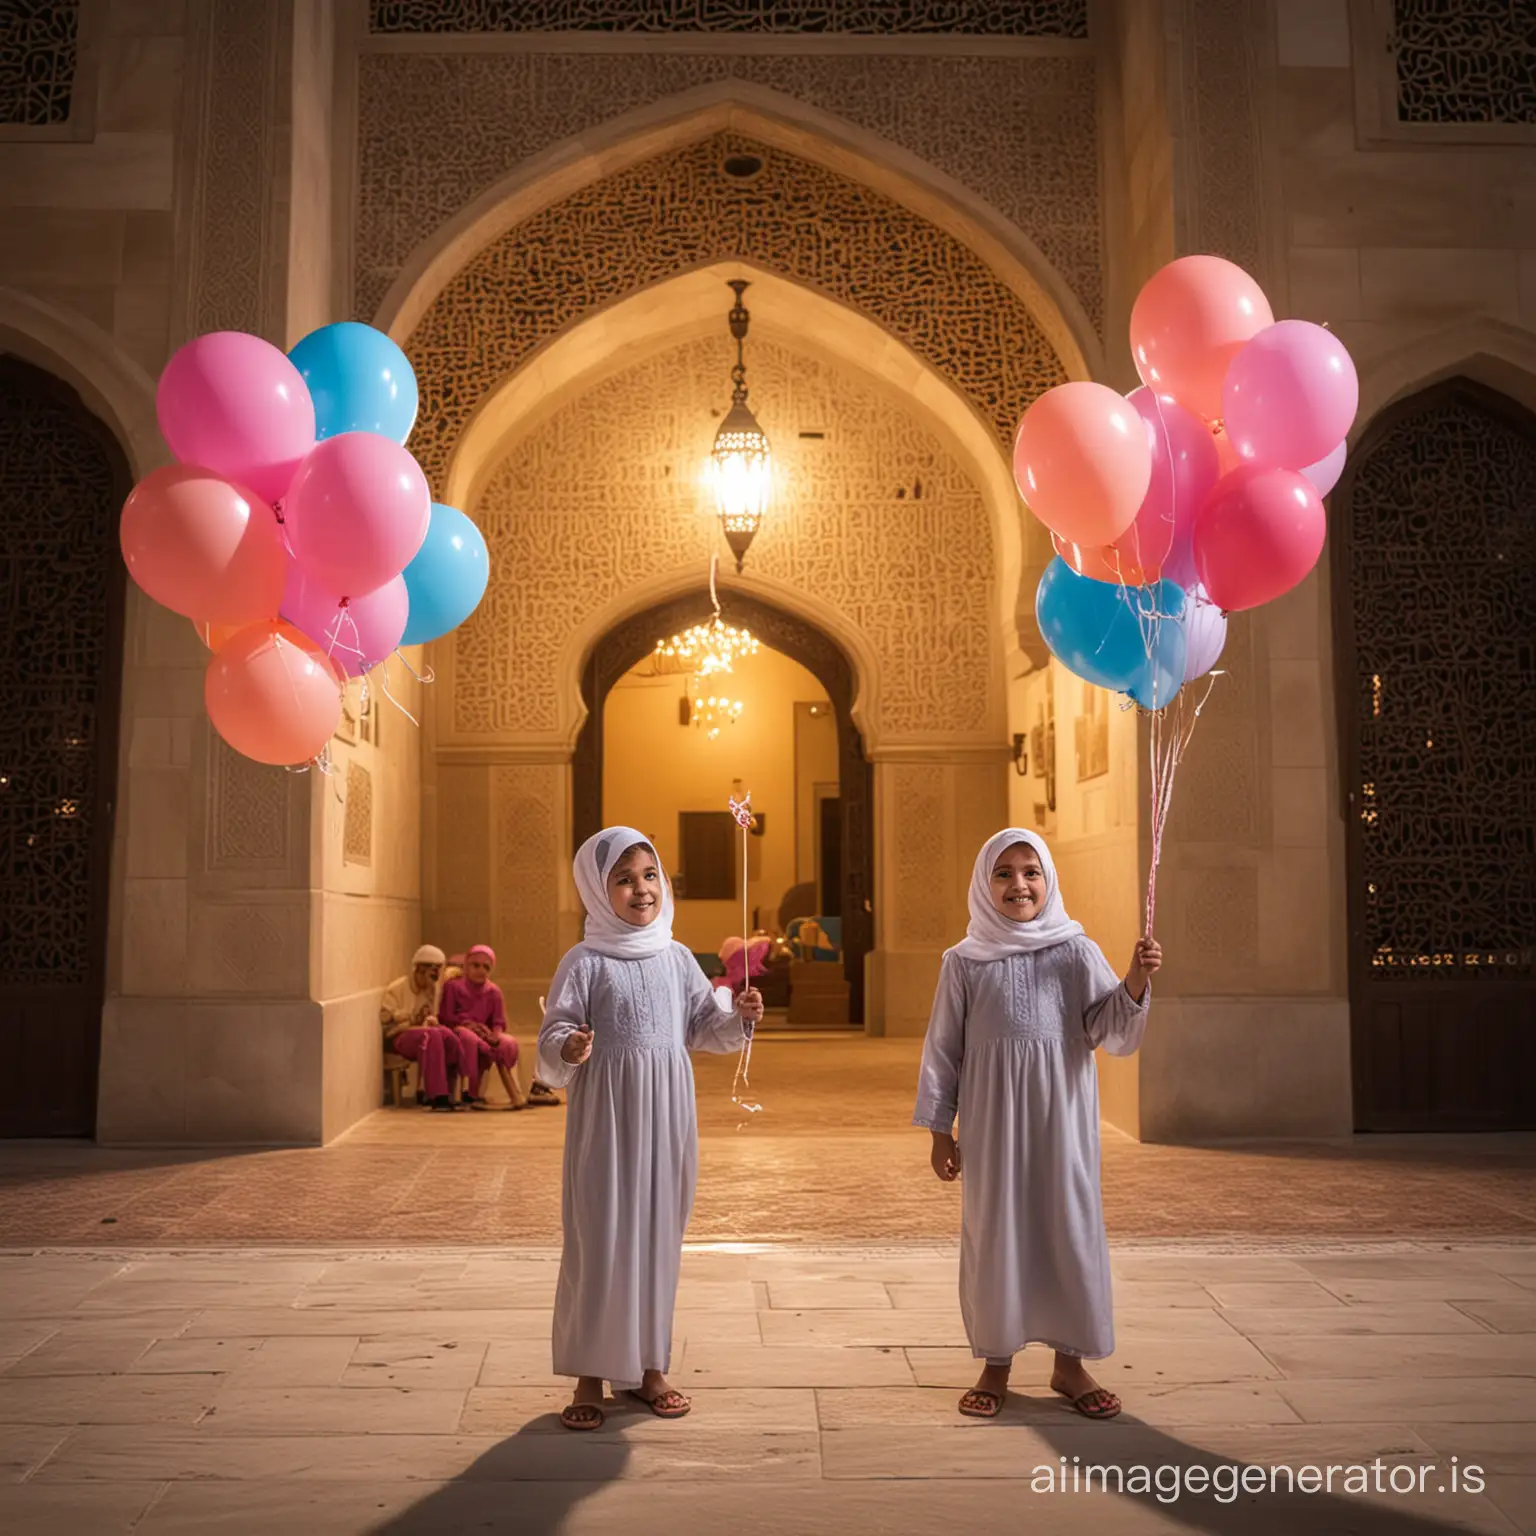 Happy Arab children holding balloons and candy for Islamic events like Eid ul Fitr in a mosque courtyard at night